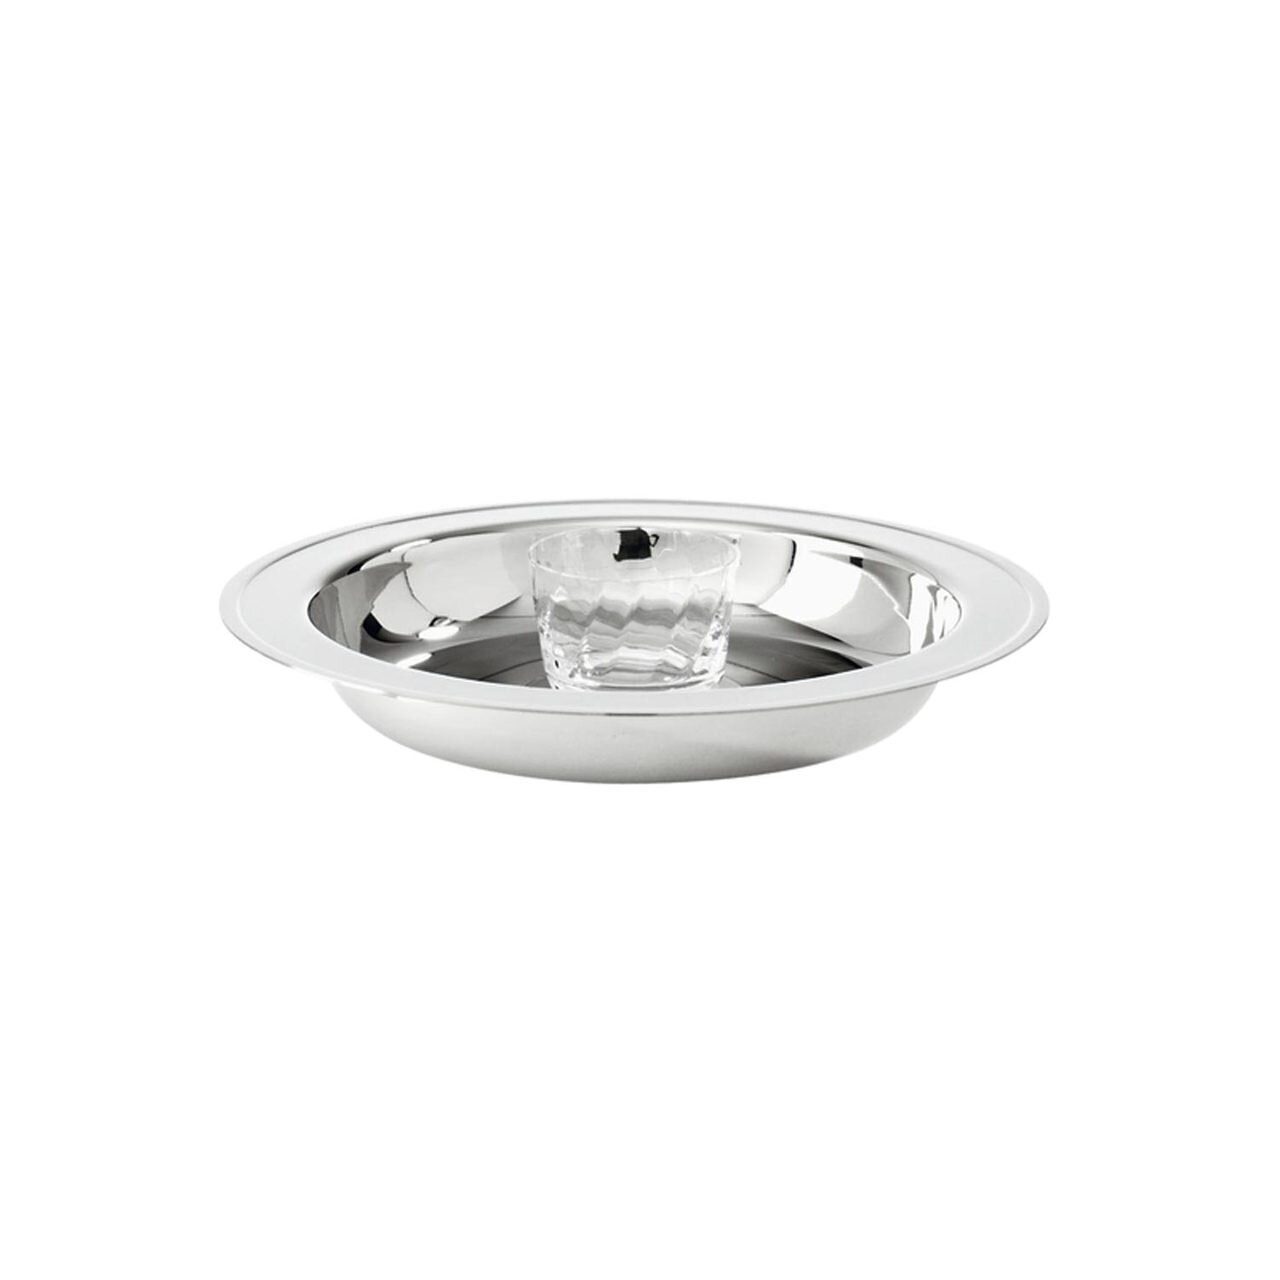 Sambonet Elite Oyster Plate With Crystal 56048-01